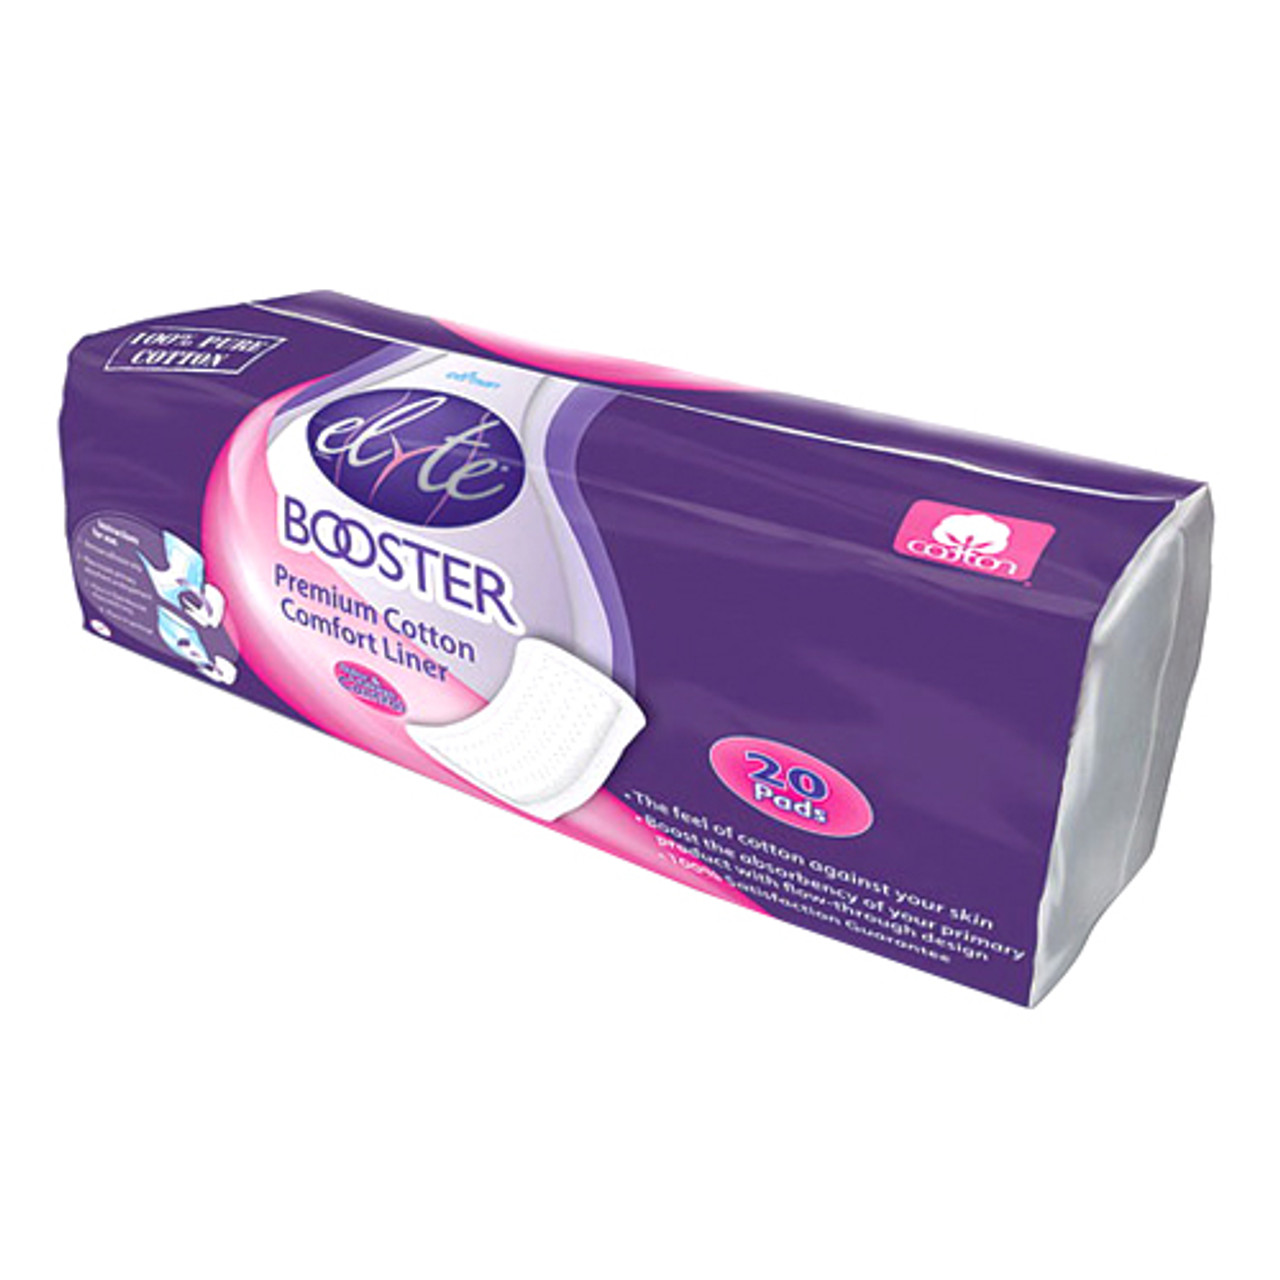 Elyte Cotton Hypoallergenic Bladder Control Pads & Pantiliners